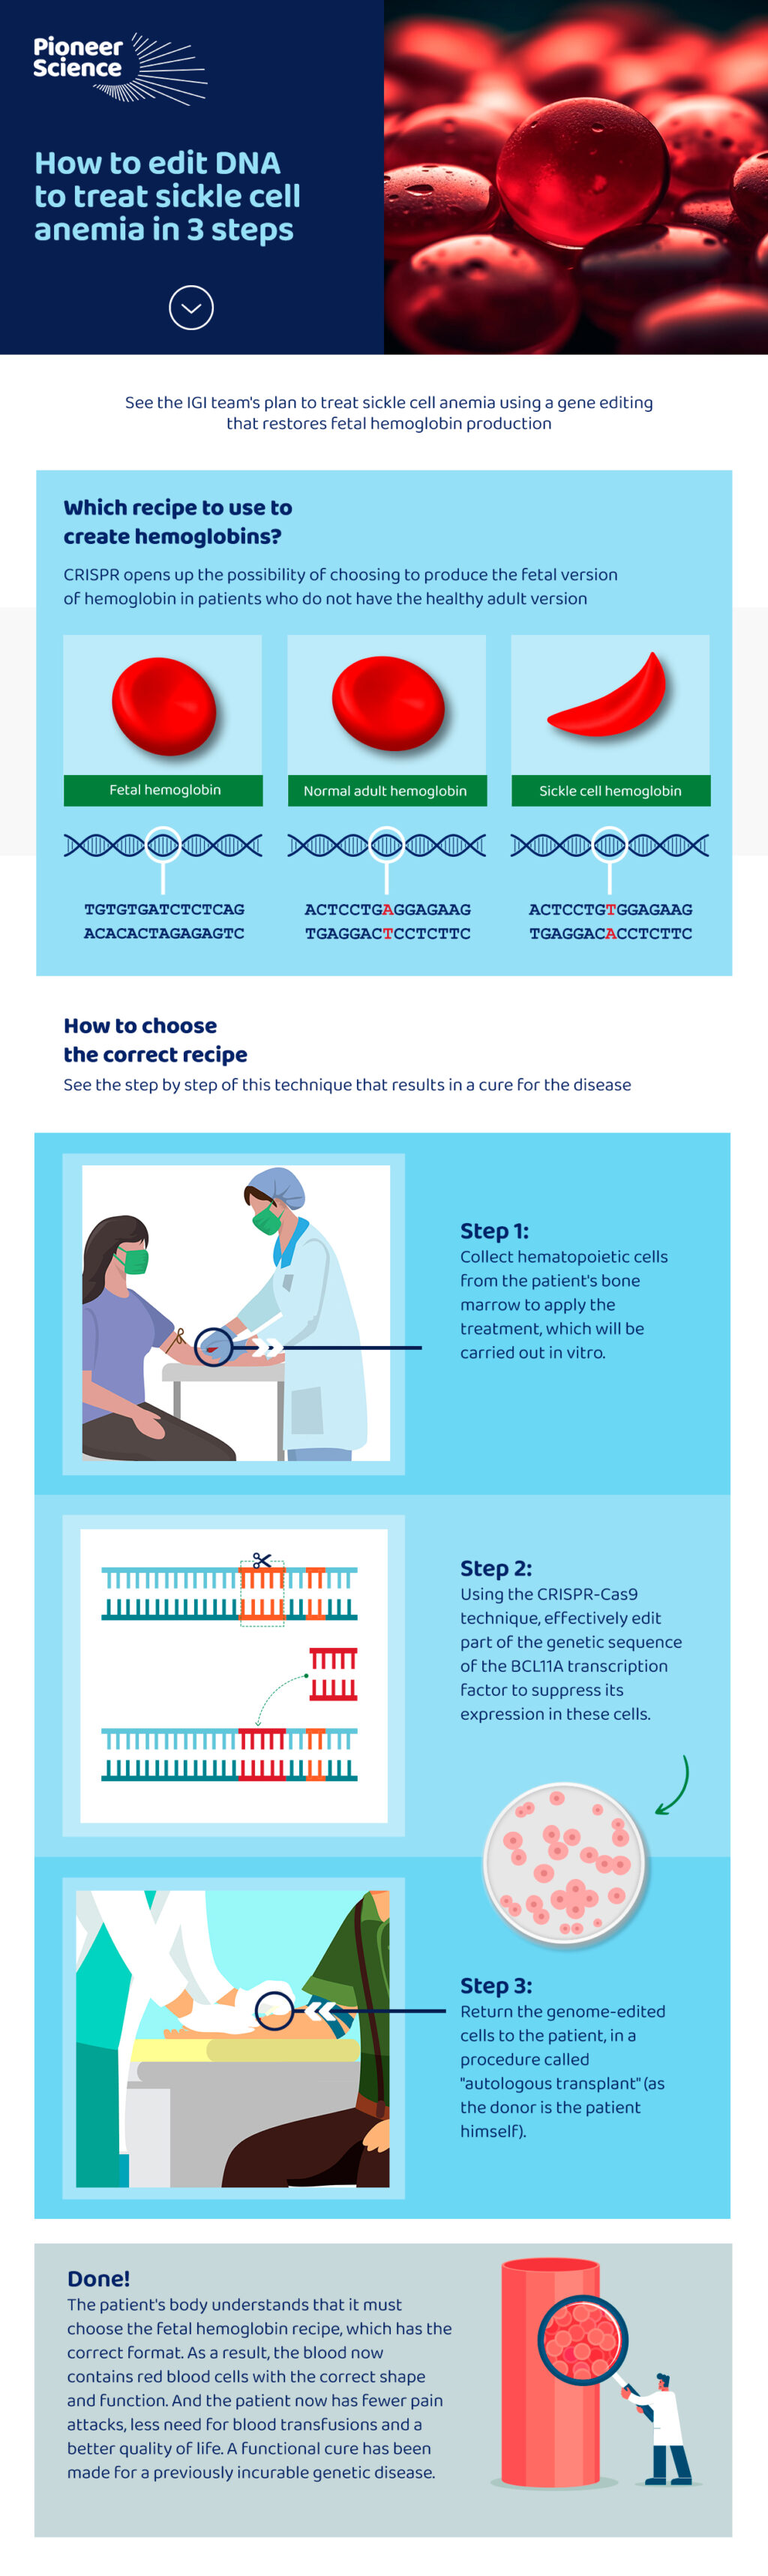 infographic CRISPR sickle cell anemia